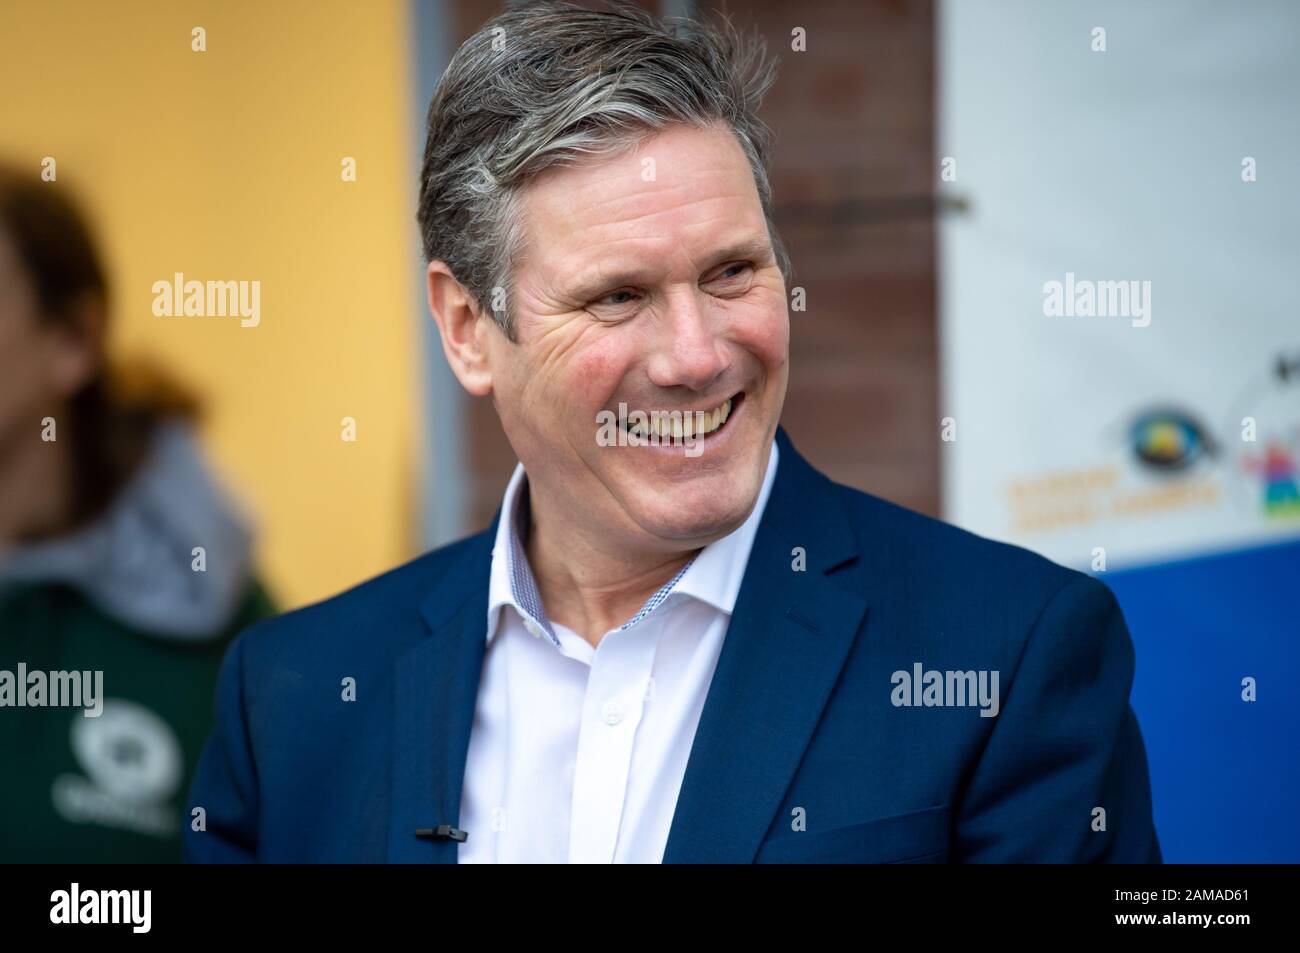 Labour MP Sir Keir Starmer on visit to Primrose Bank Community Centre, Oldham 11th January 2020. Stock Photo